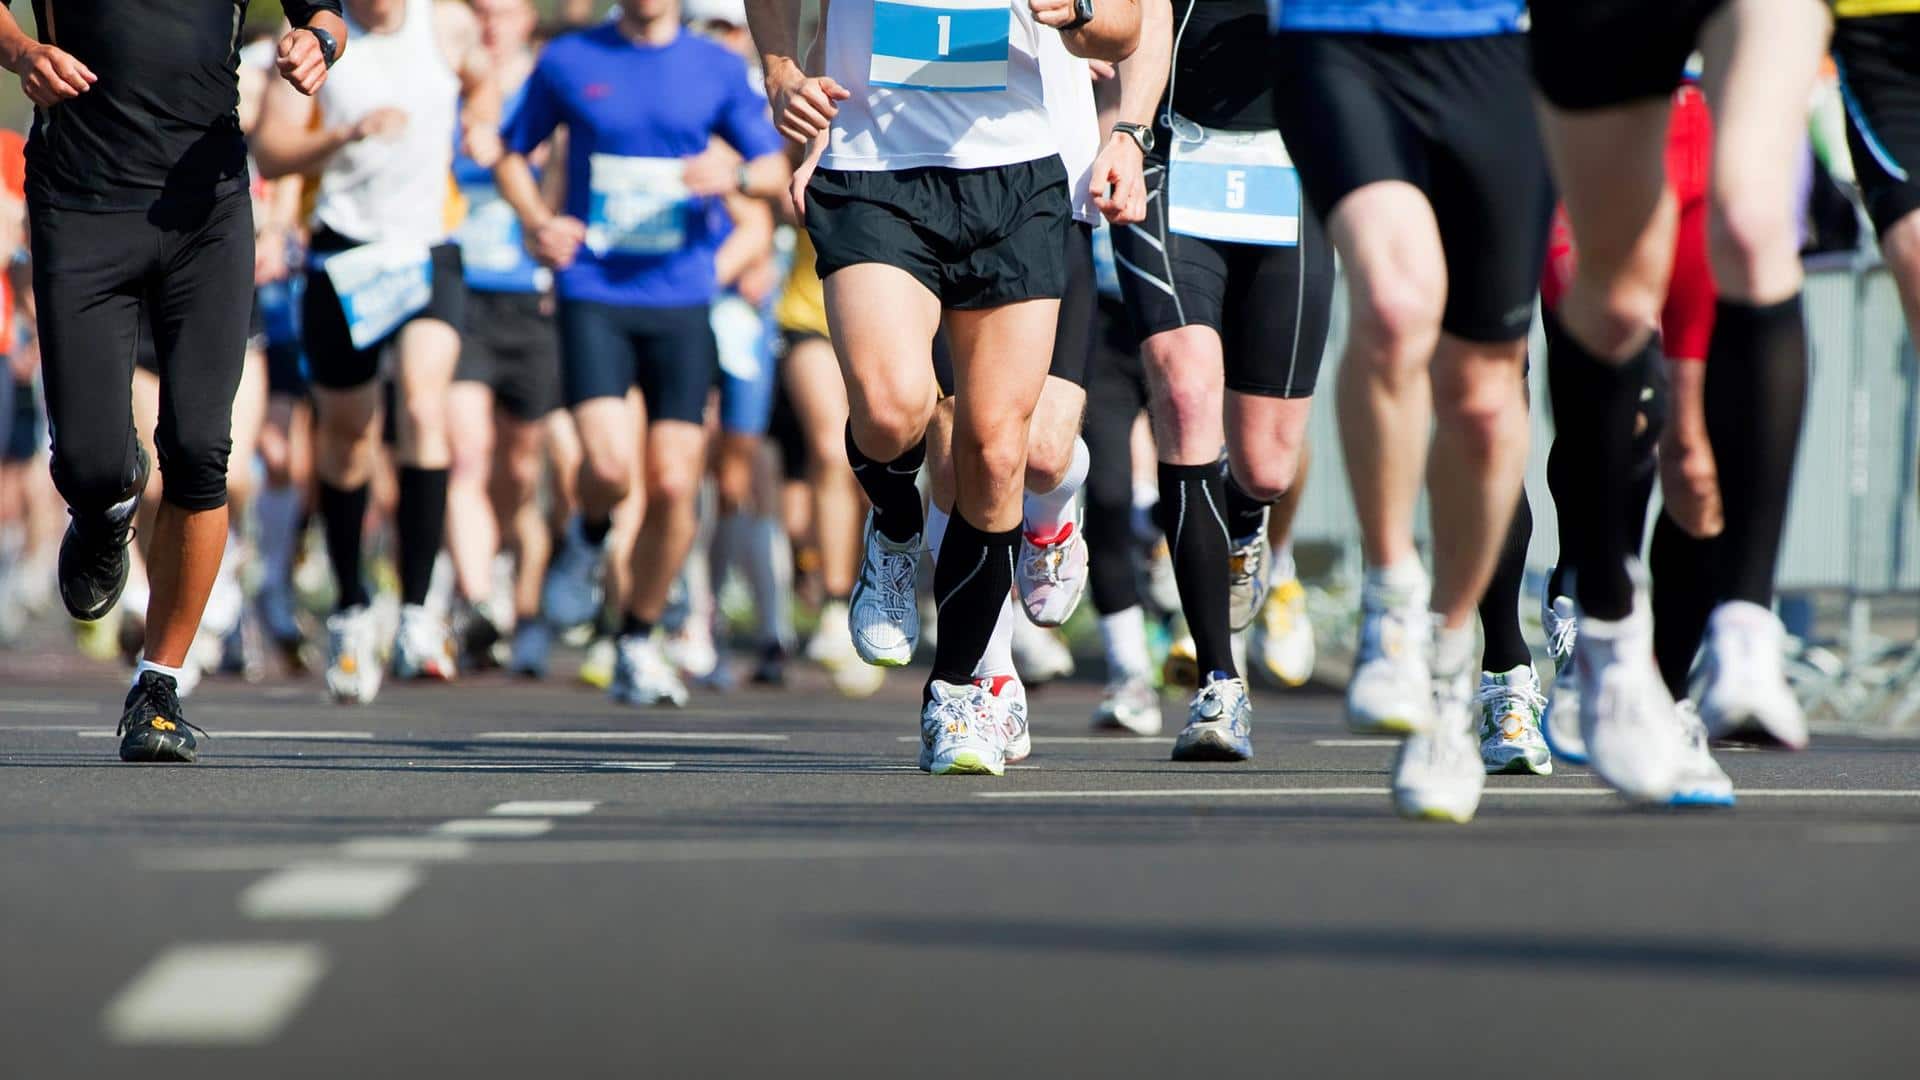 Here's how you can prepare yourself for your first marathon